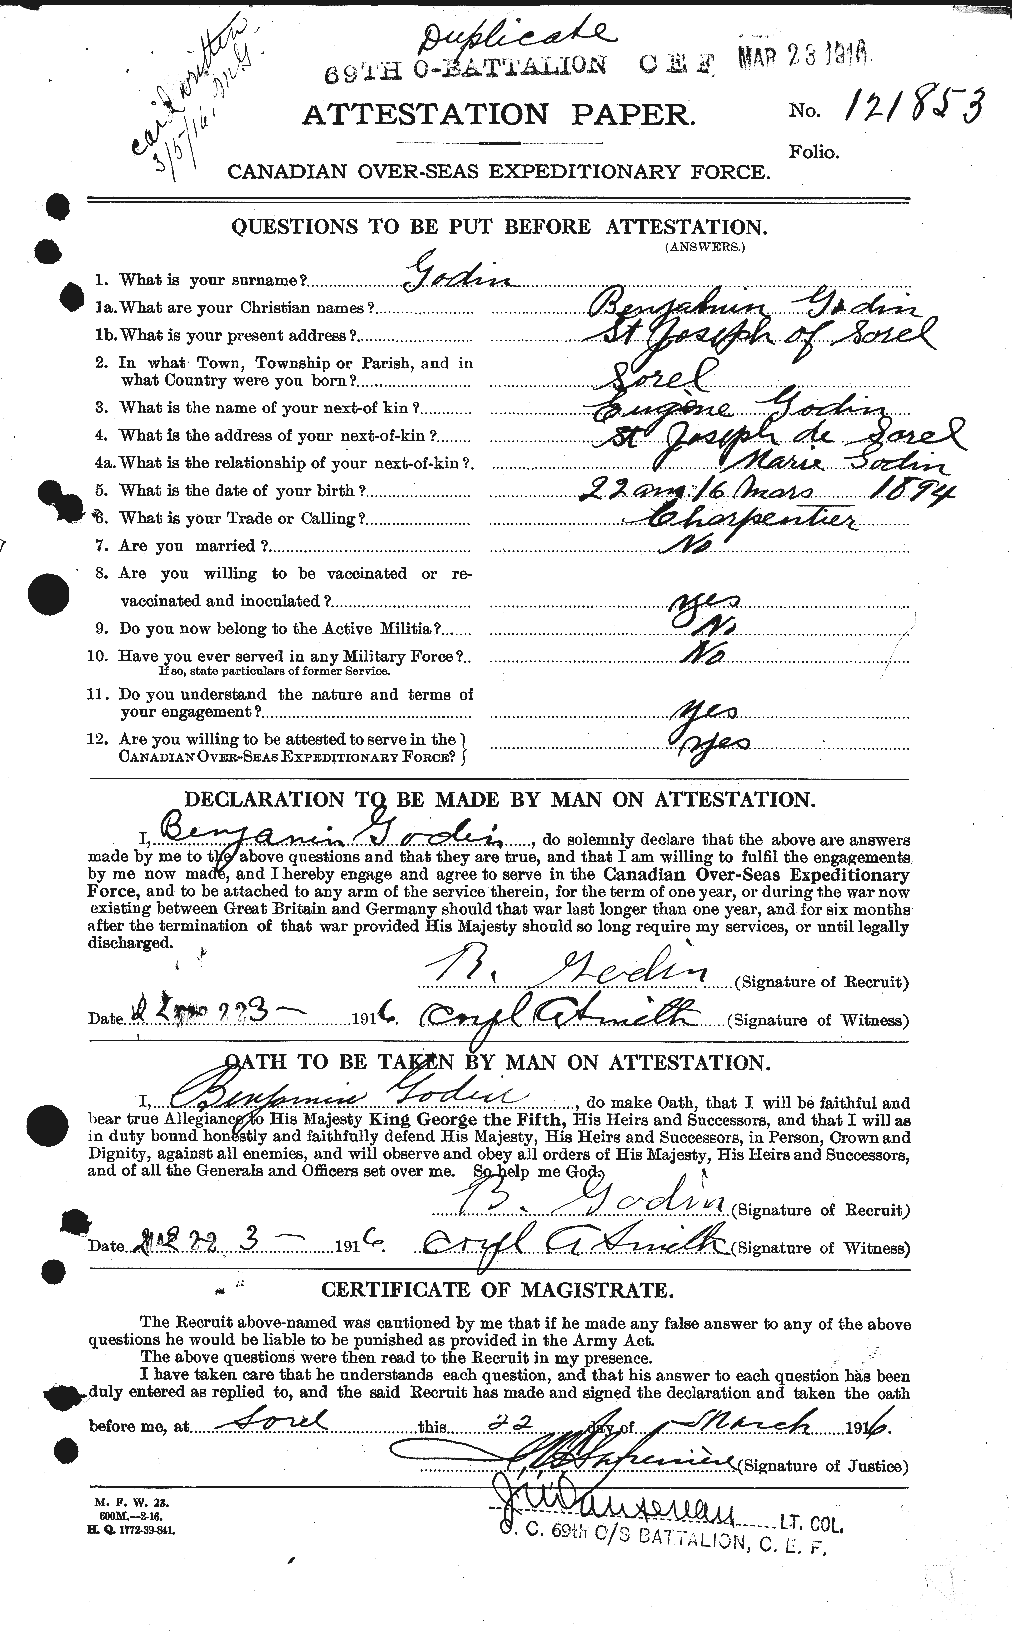 Personnel Records of the First World War - CEF 354503a